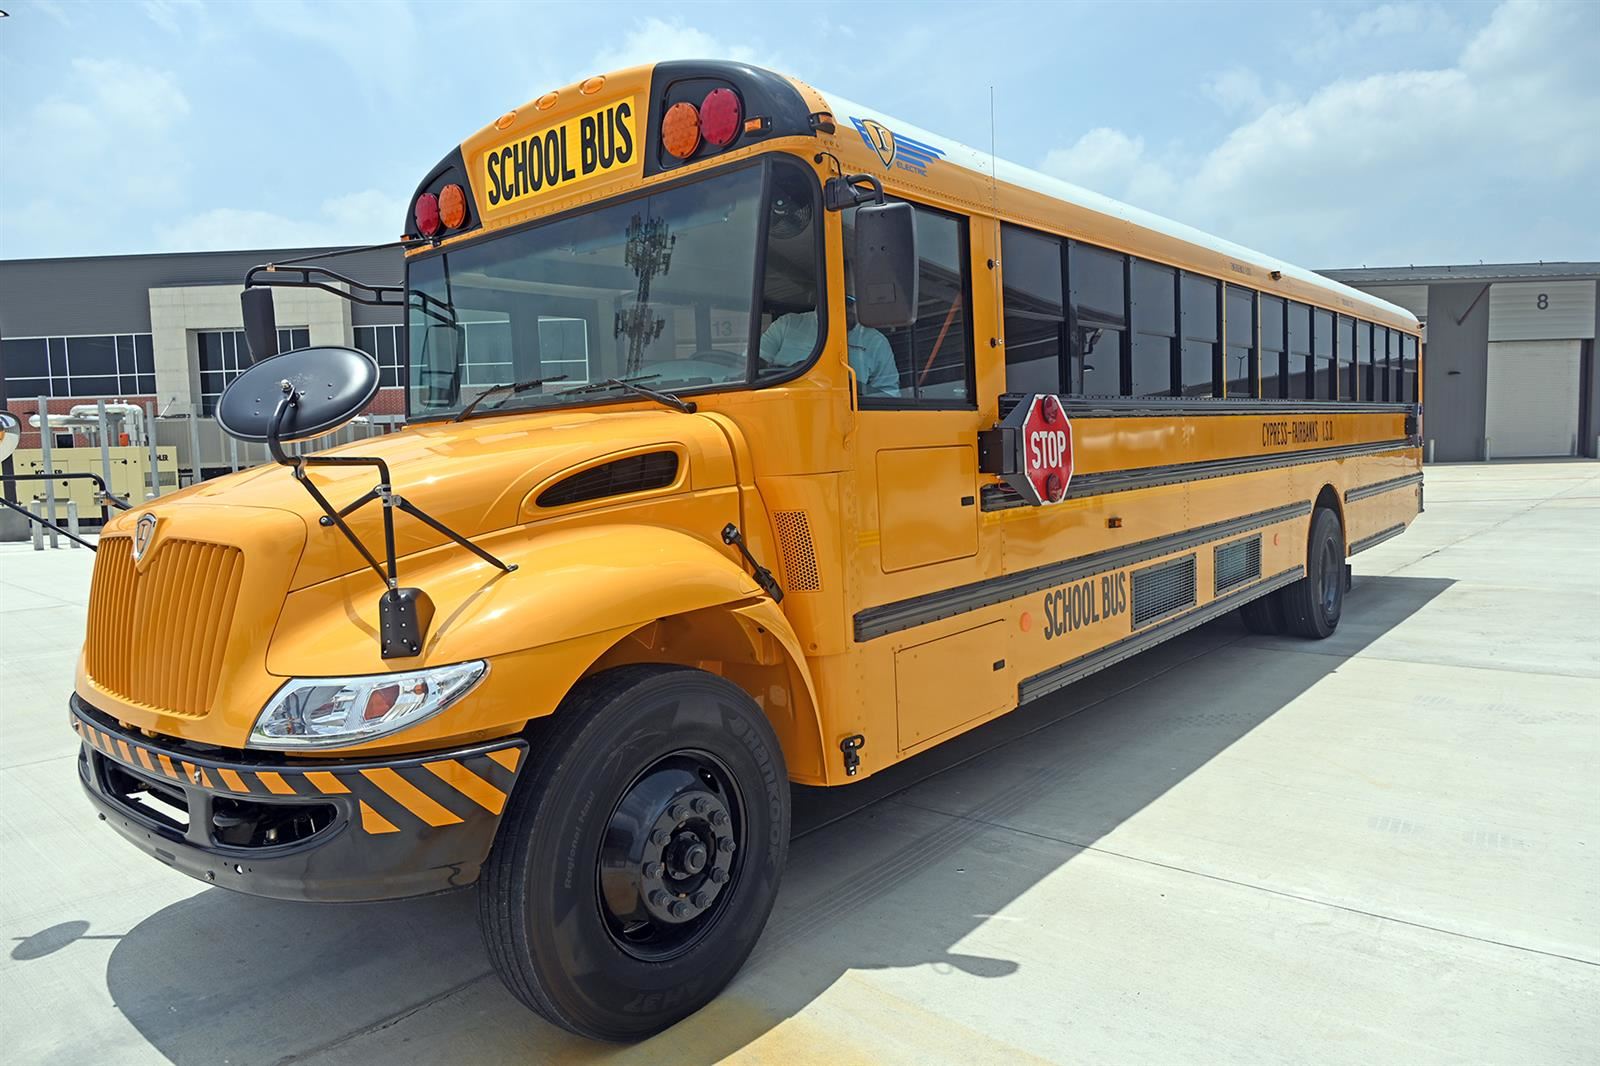 New CFISD electric buses provide environmental, cost benefits.